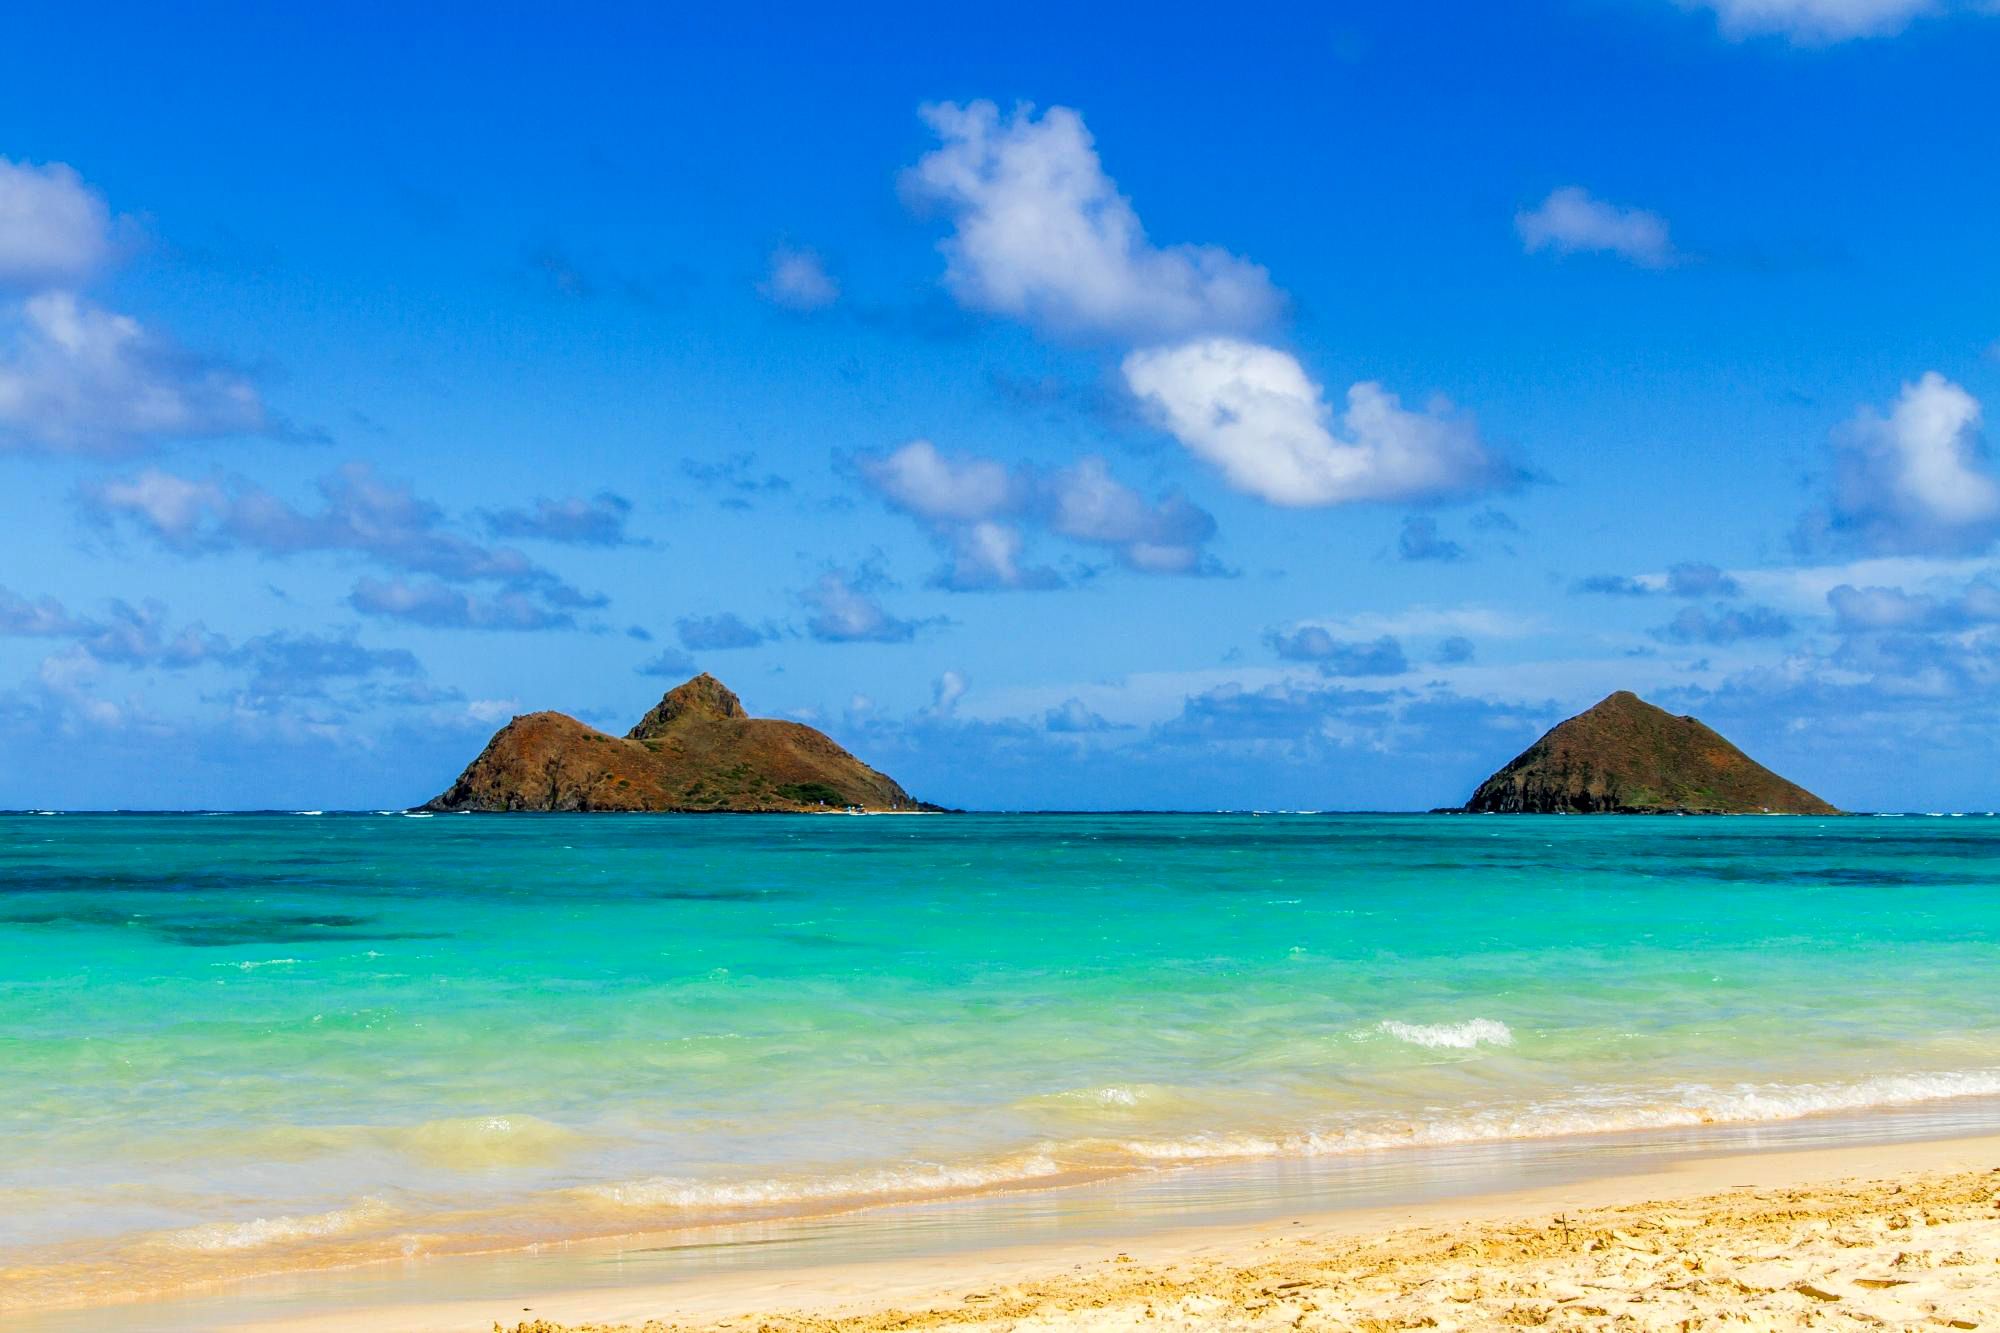 Kailua Beach Pictures Wallpapers